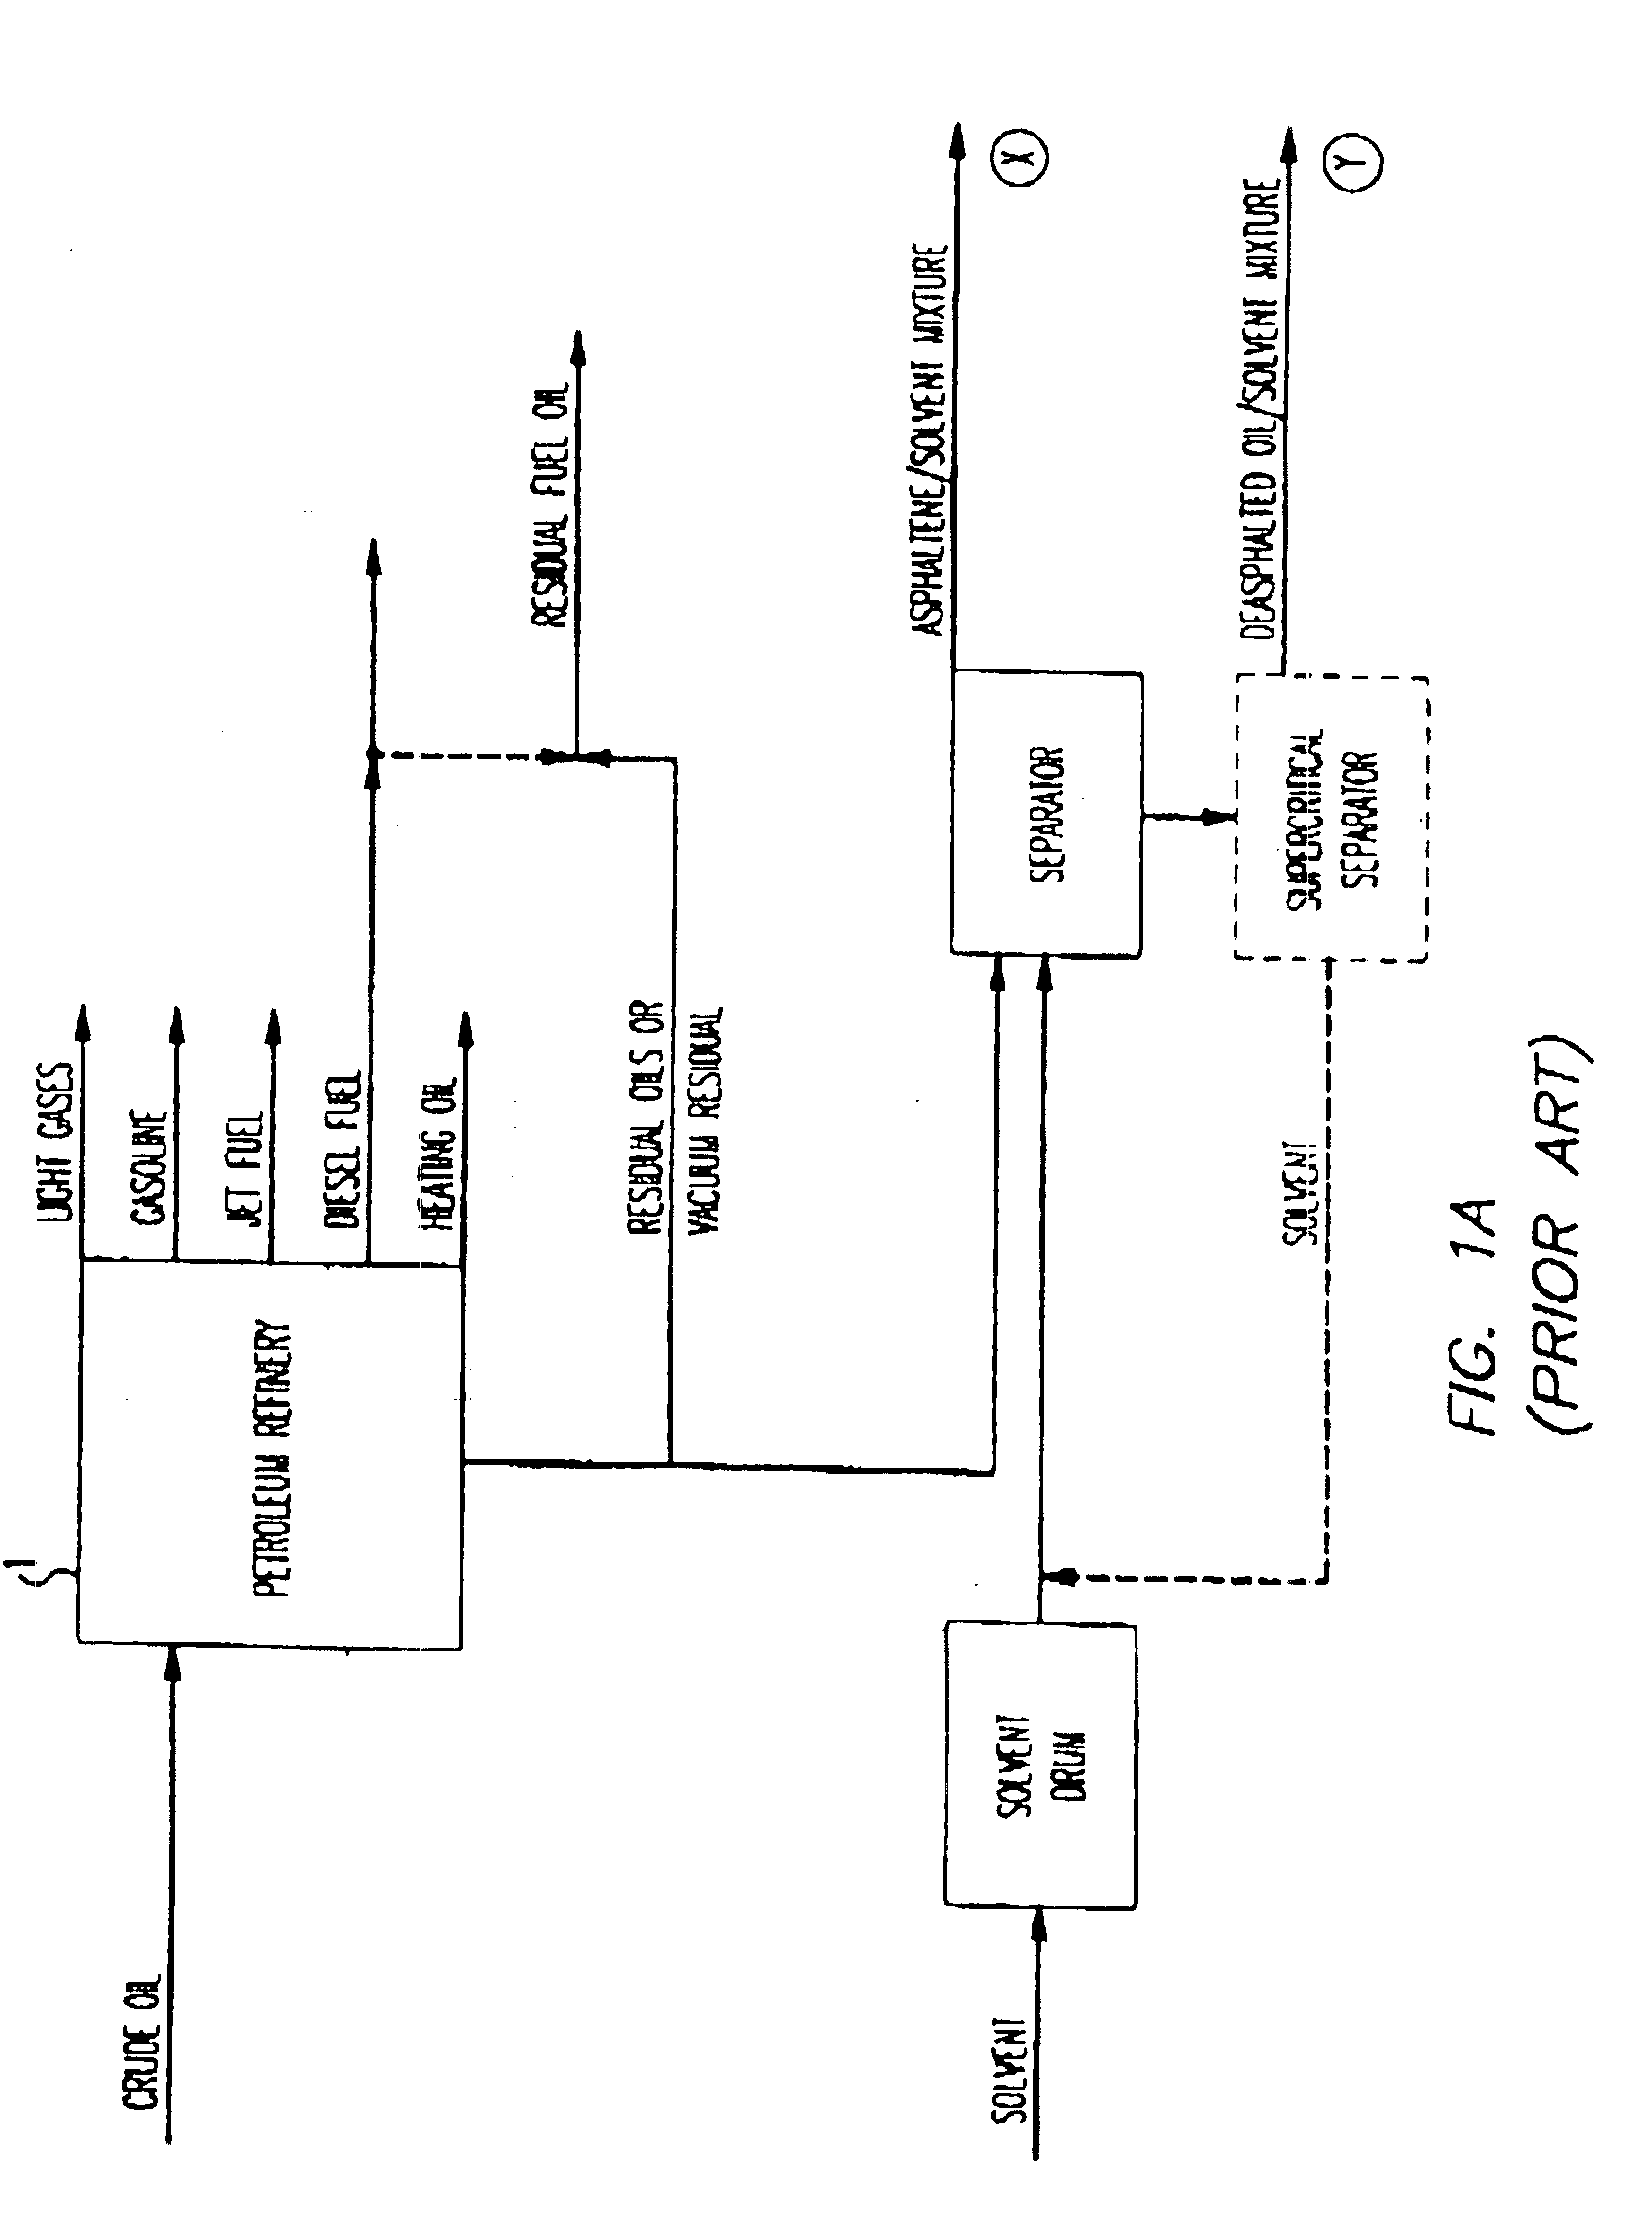 Method of and apparatus for producing pellets from heavy hydrocarbon liquid